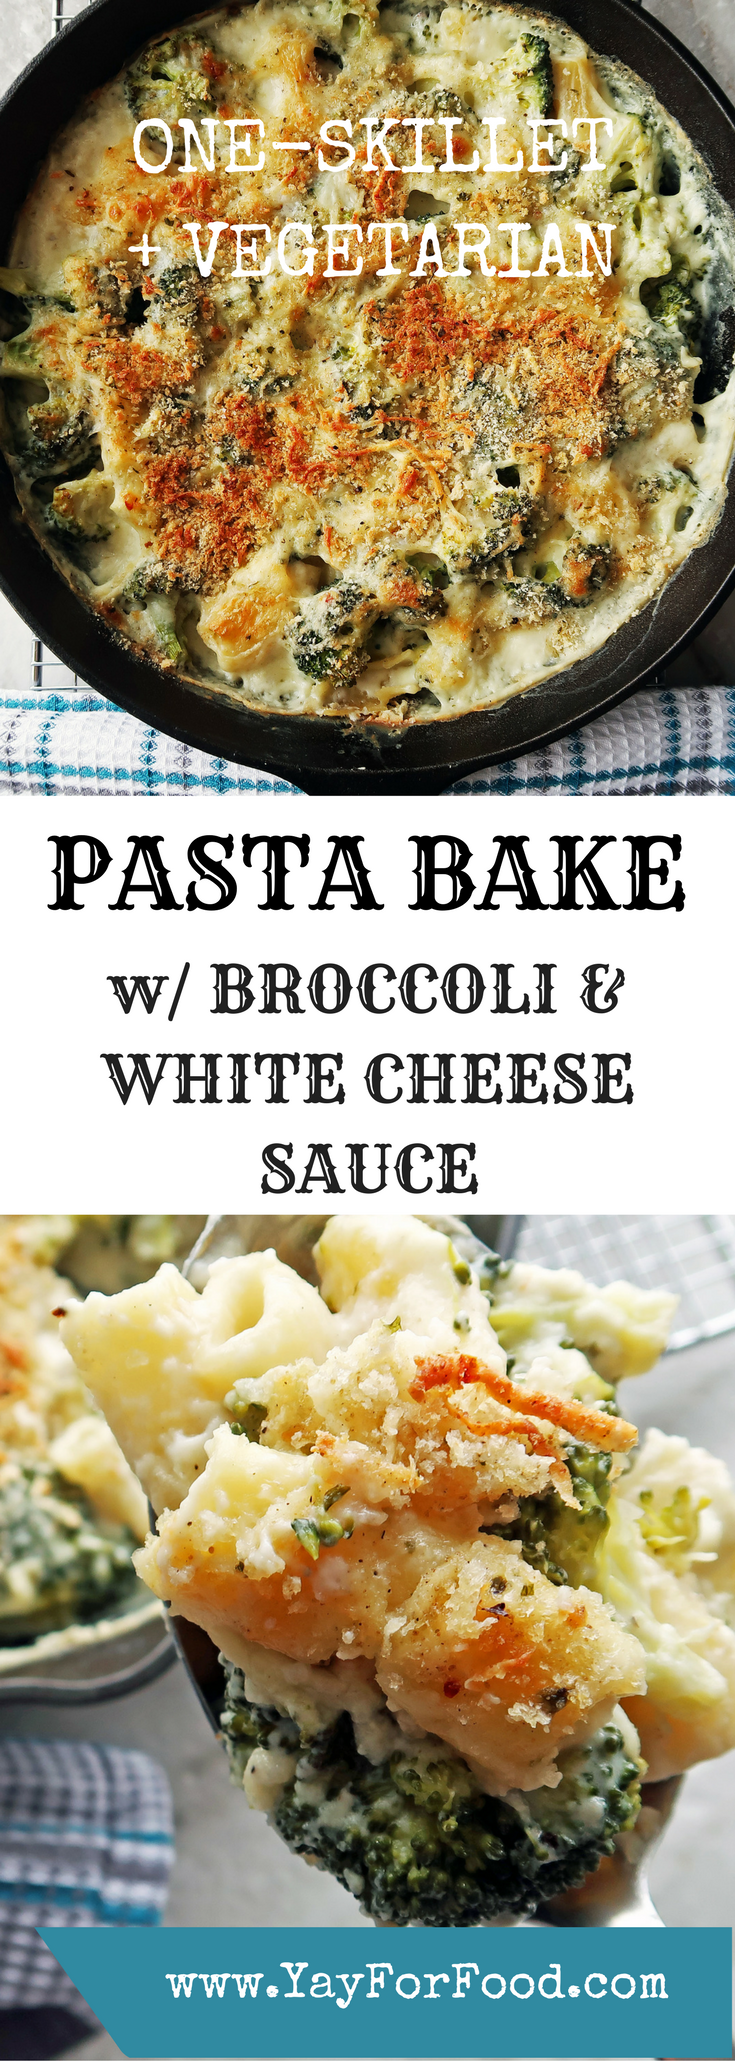 One Skillet Pasta Bake with Broccoli and White Cheese Sauce - Yay! For Food